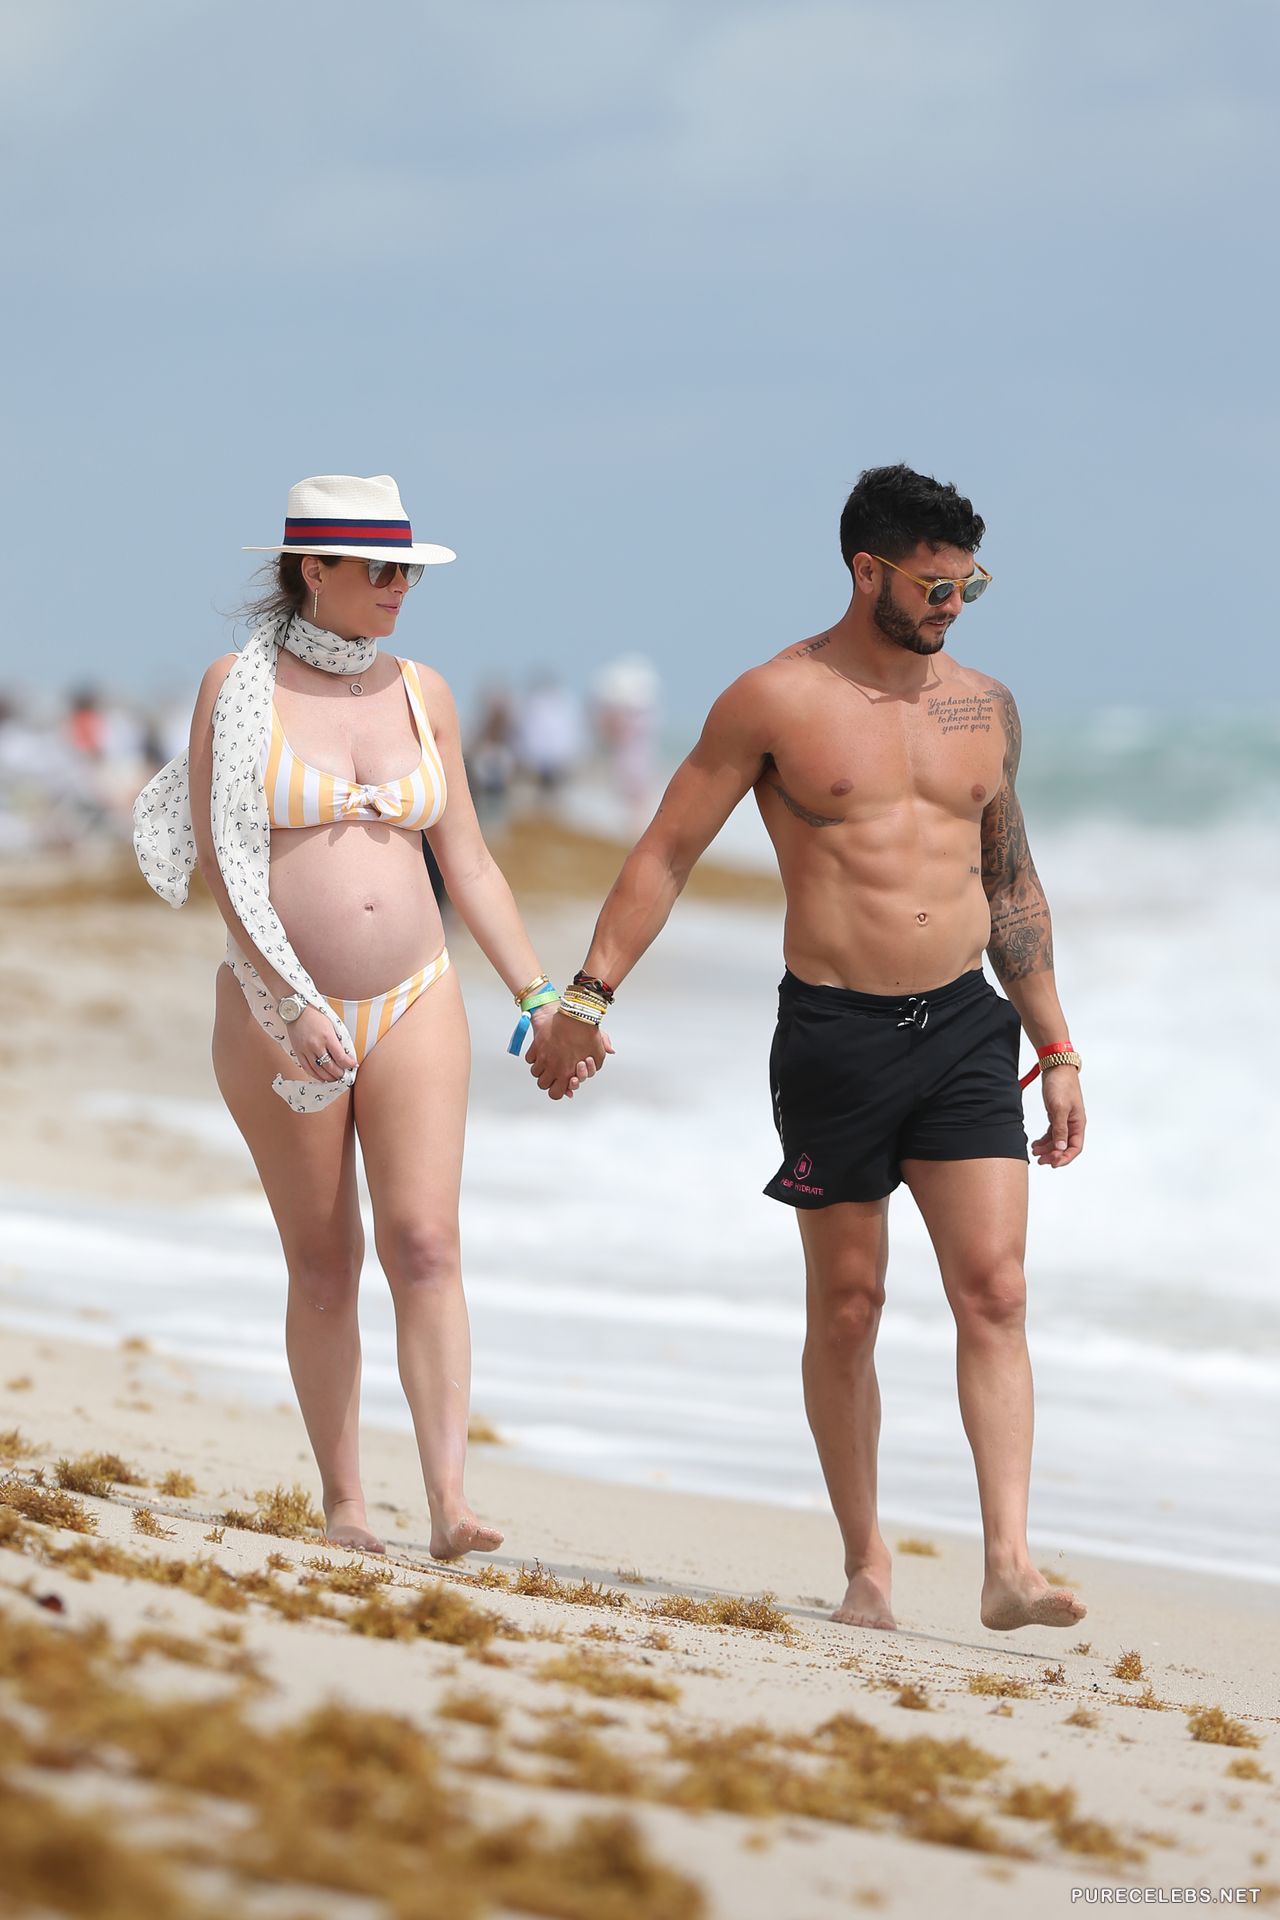 Chloe Melas takes a walk on the beach with her man and she shows off her pr...